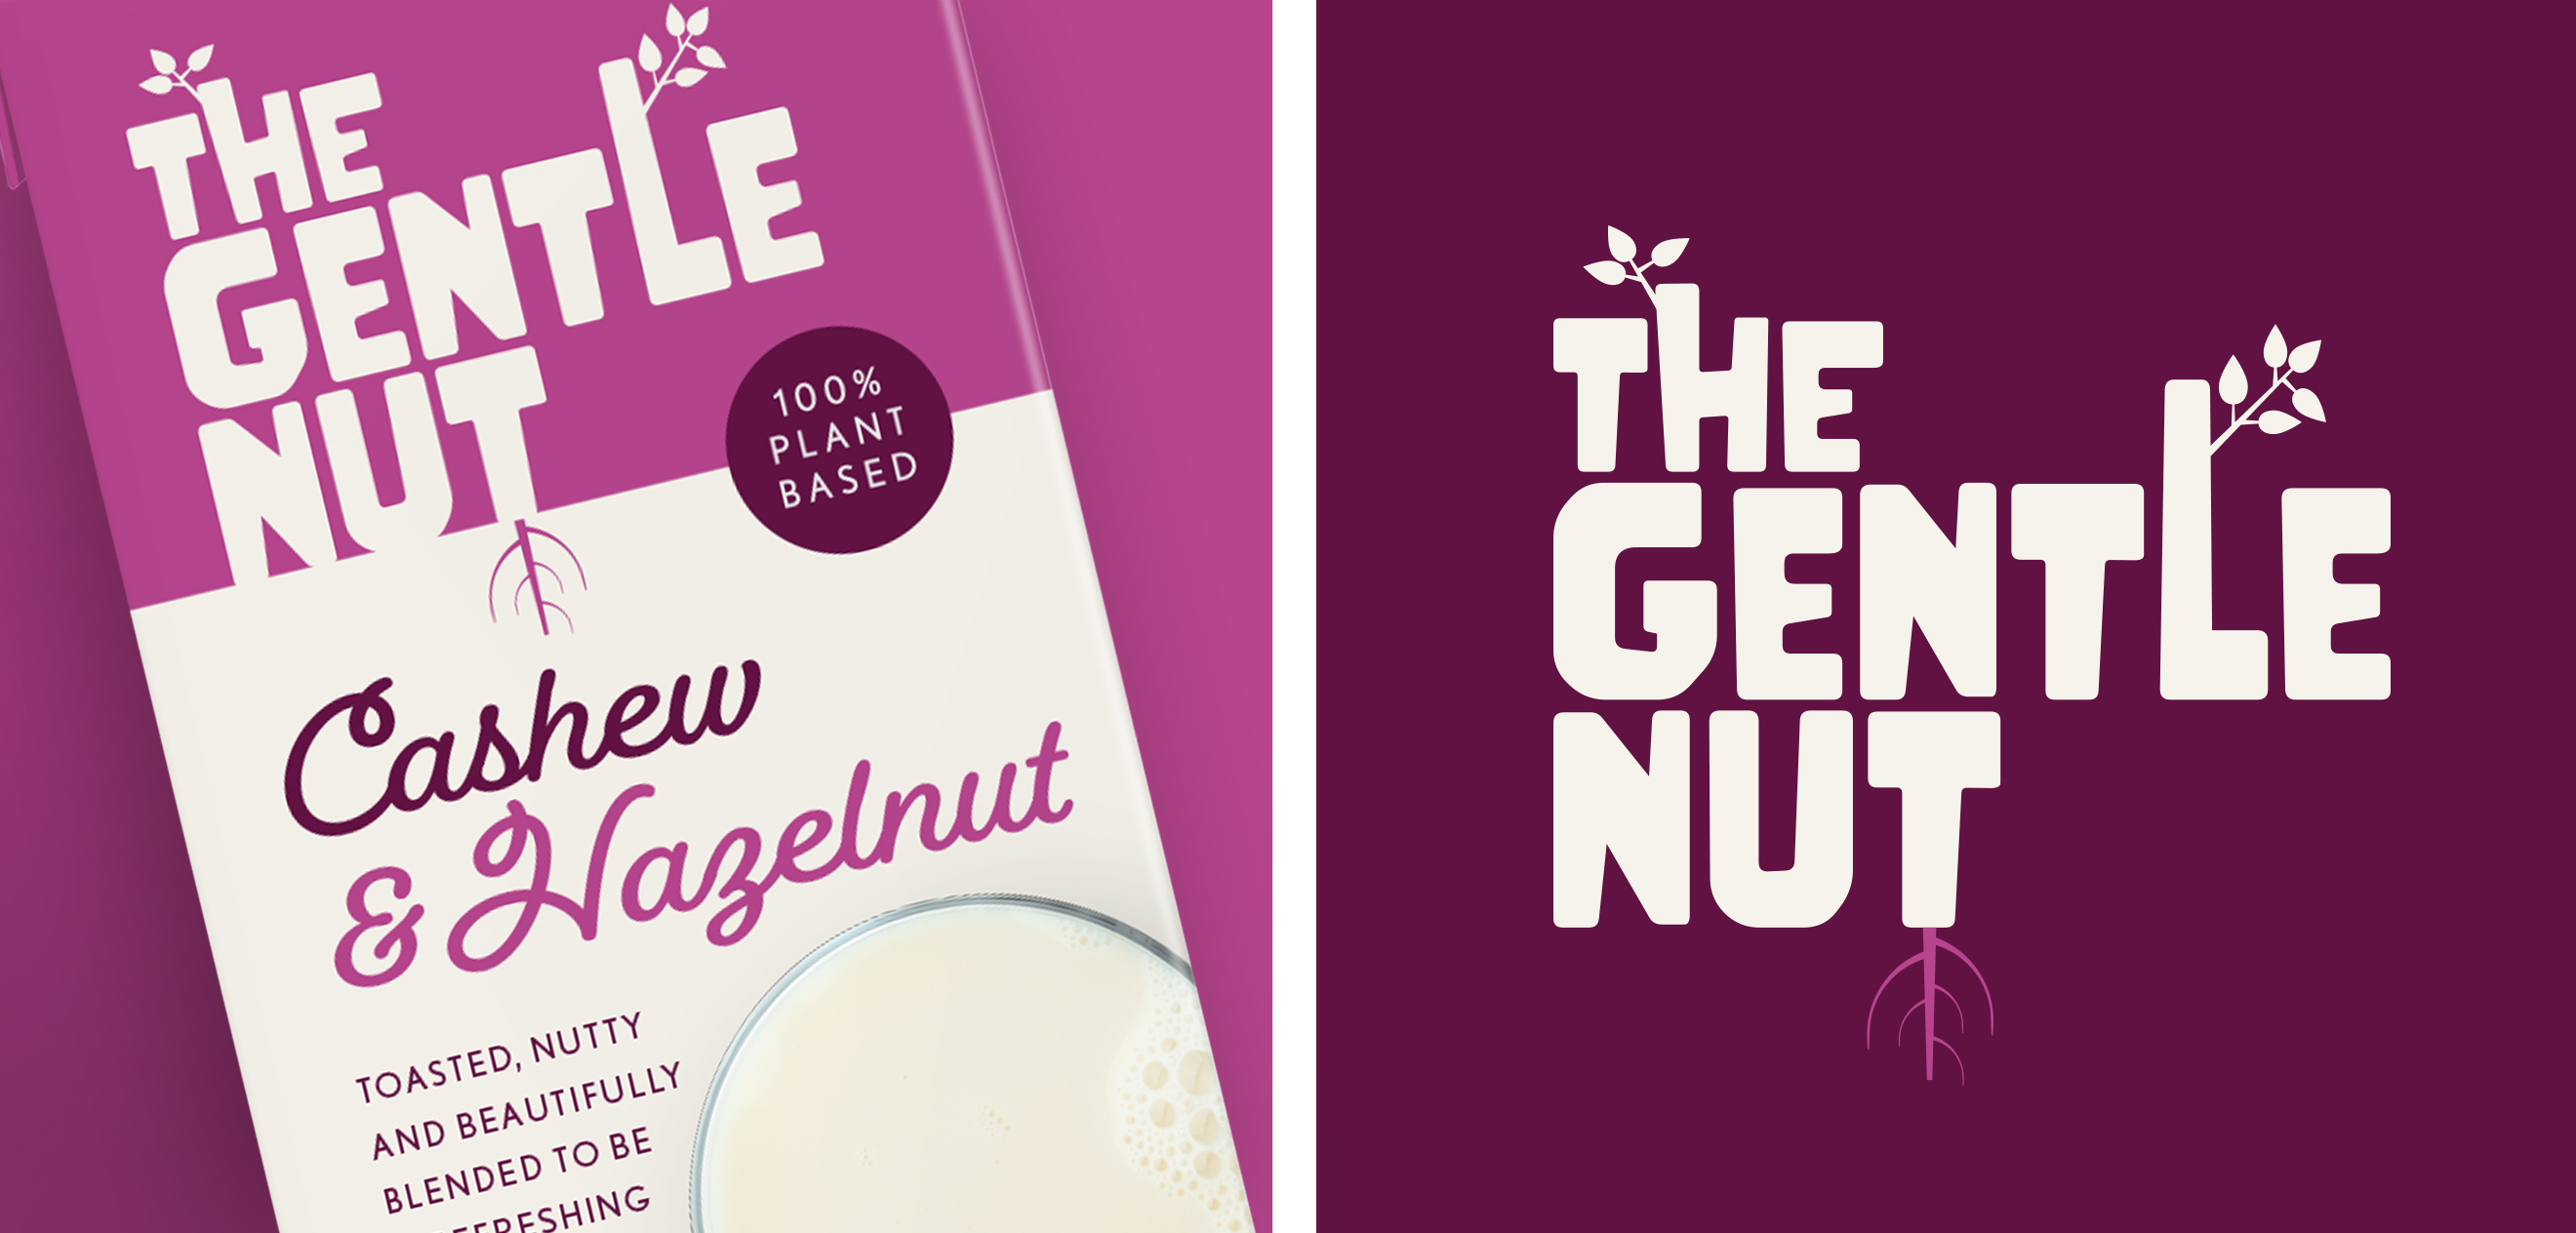 The Brand Nursey Creates Branding for a Better Kind of Alternative to Dairy